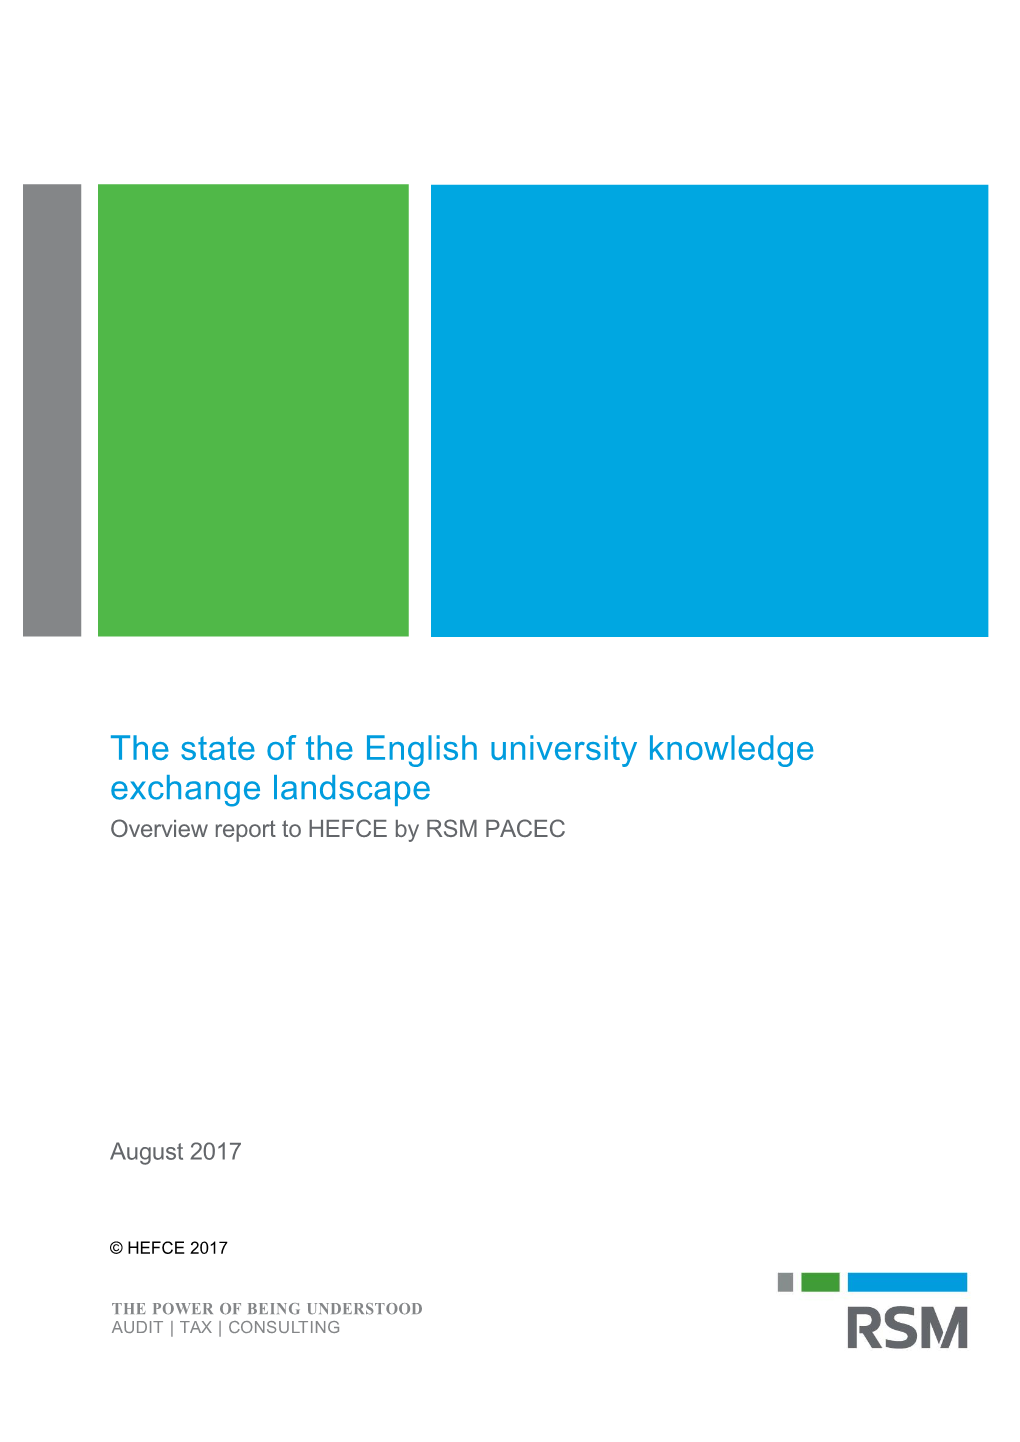 The State of the English University Knowledge Exchange Landscape Overview Report to HEFCE by RSM PACEC